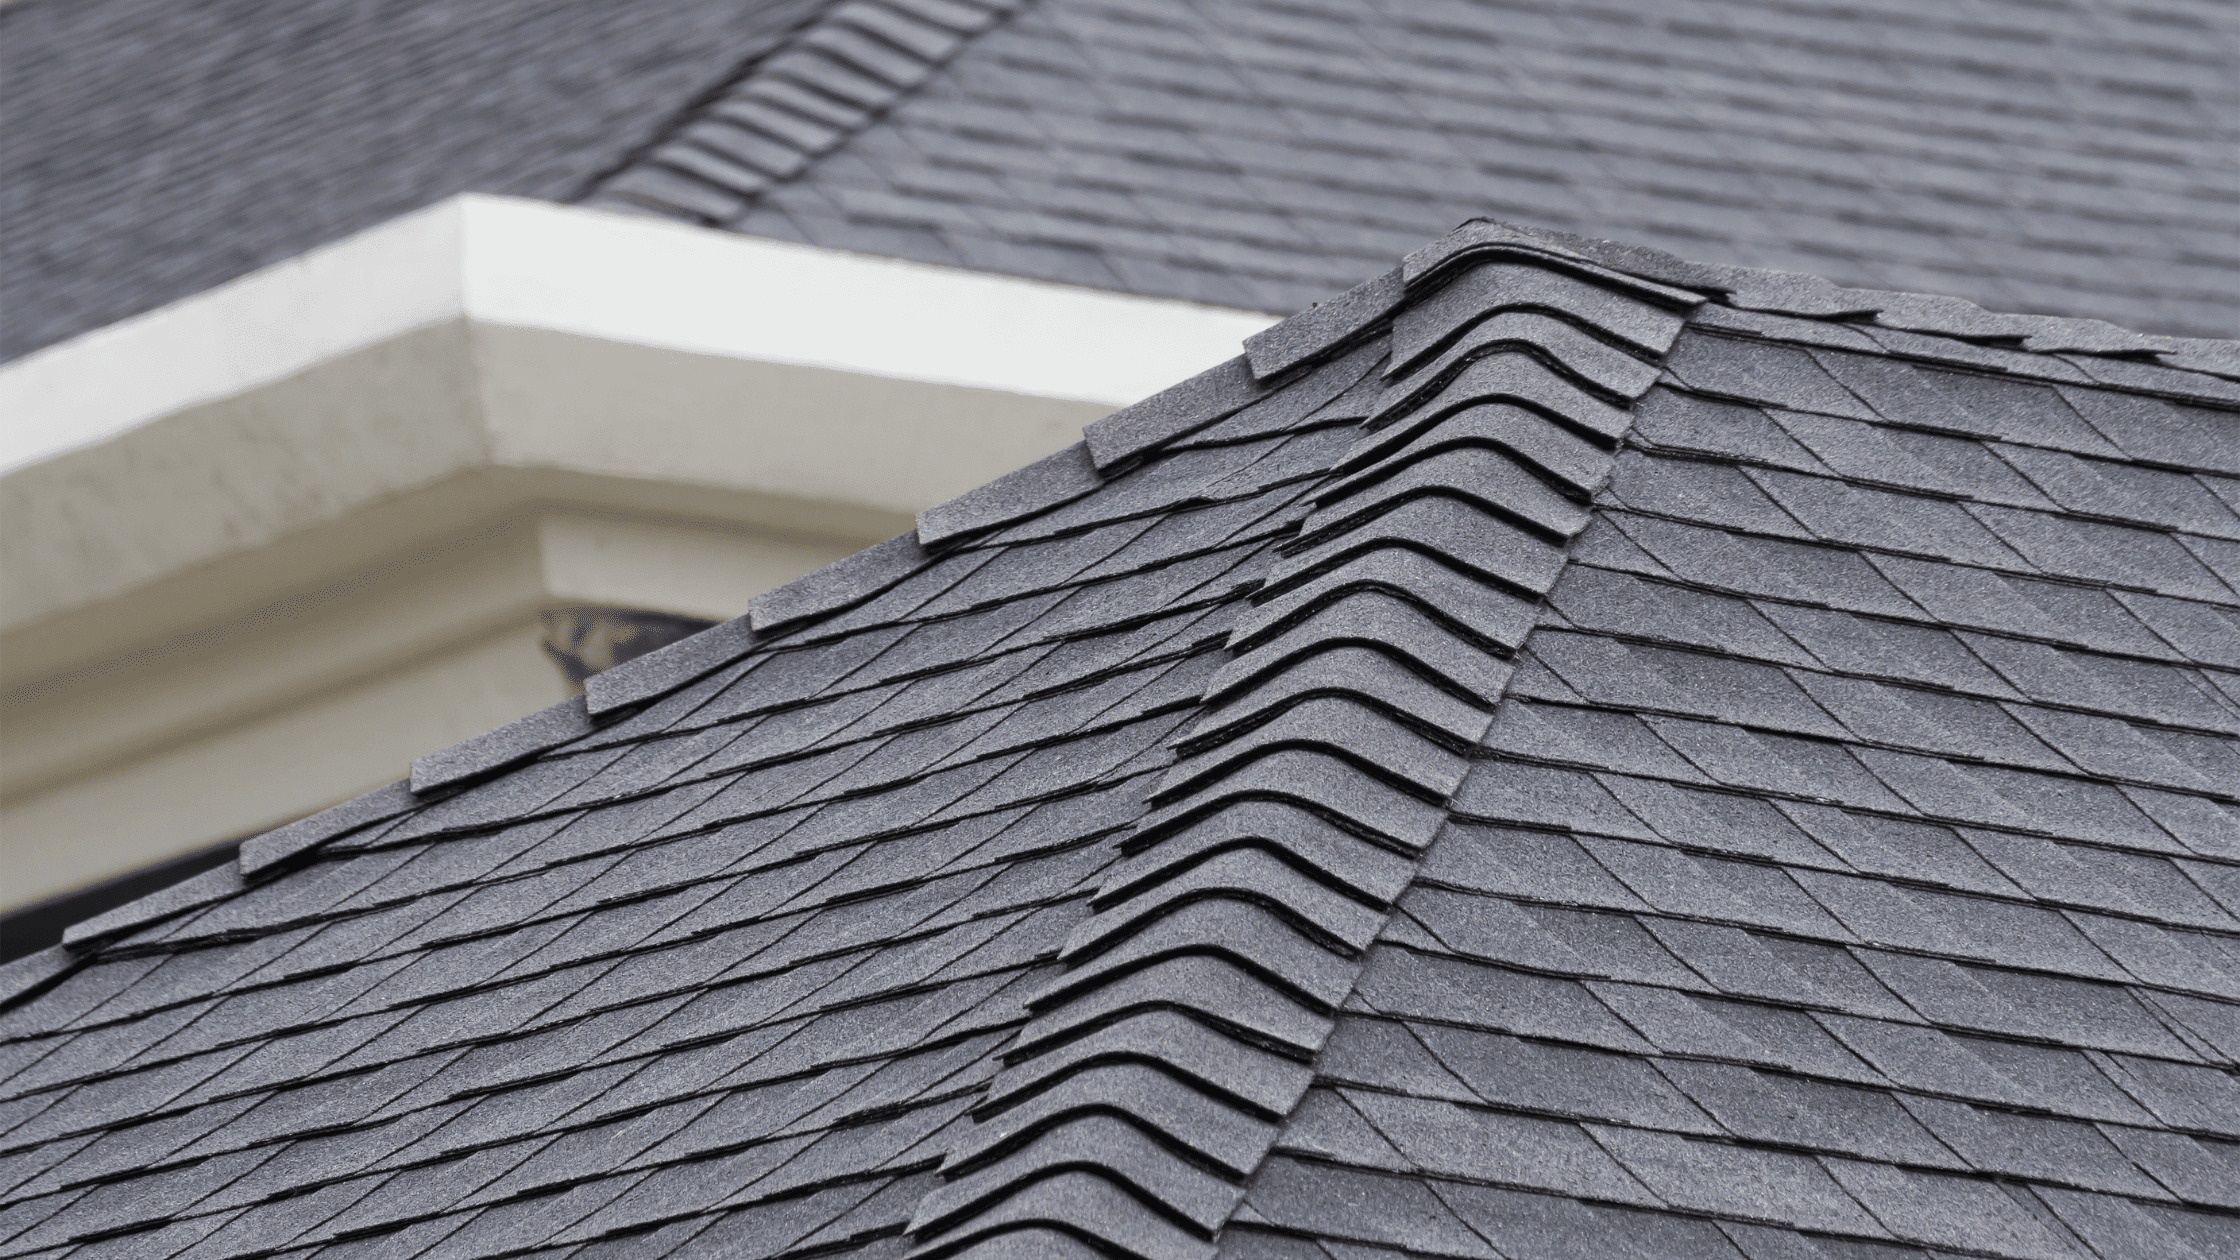 What are ridge caps on a roof